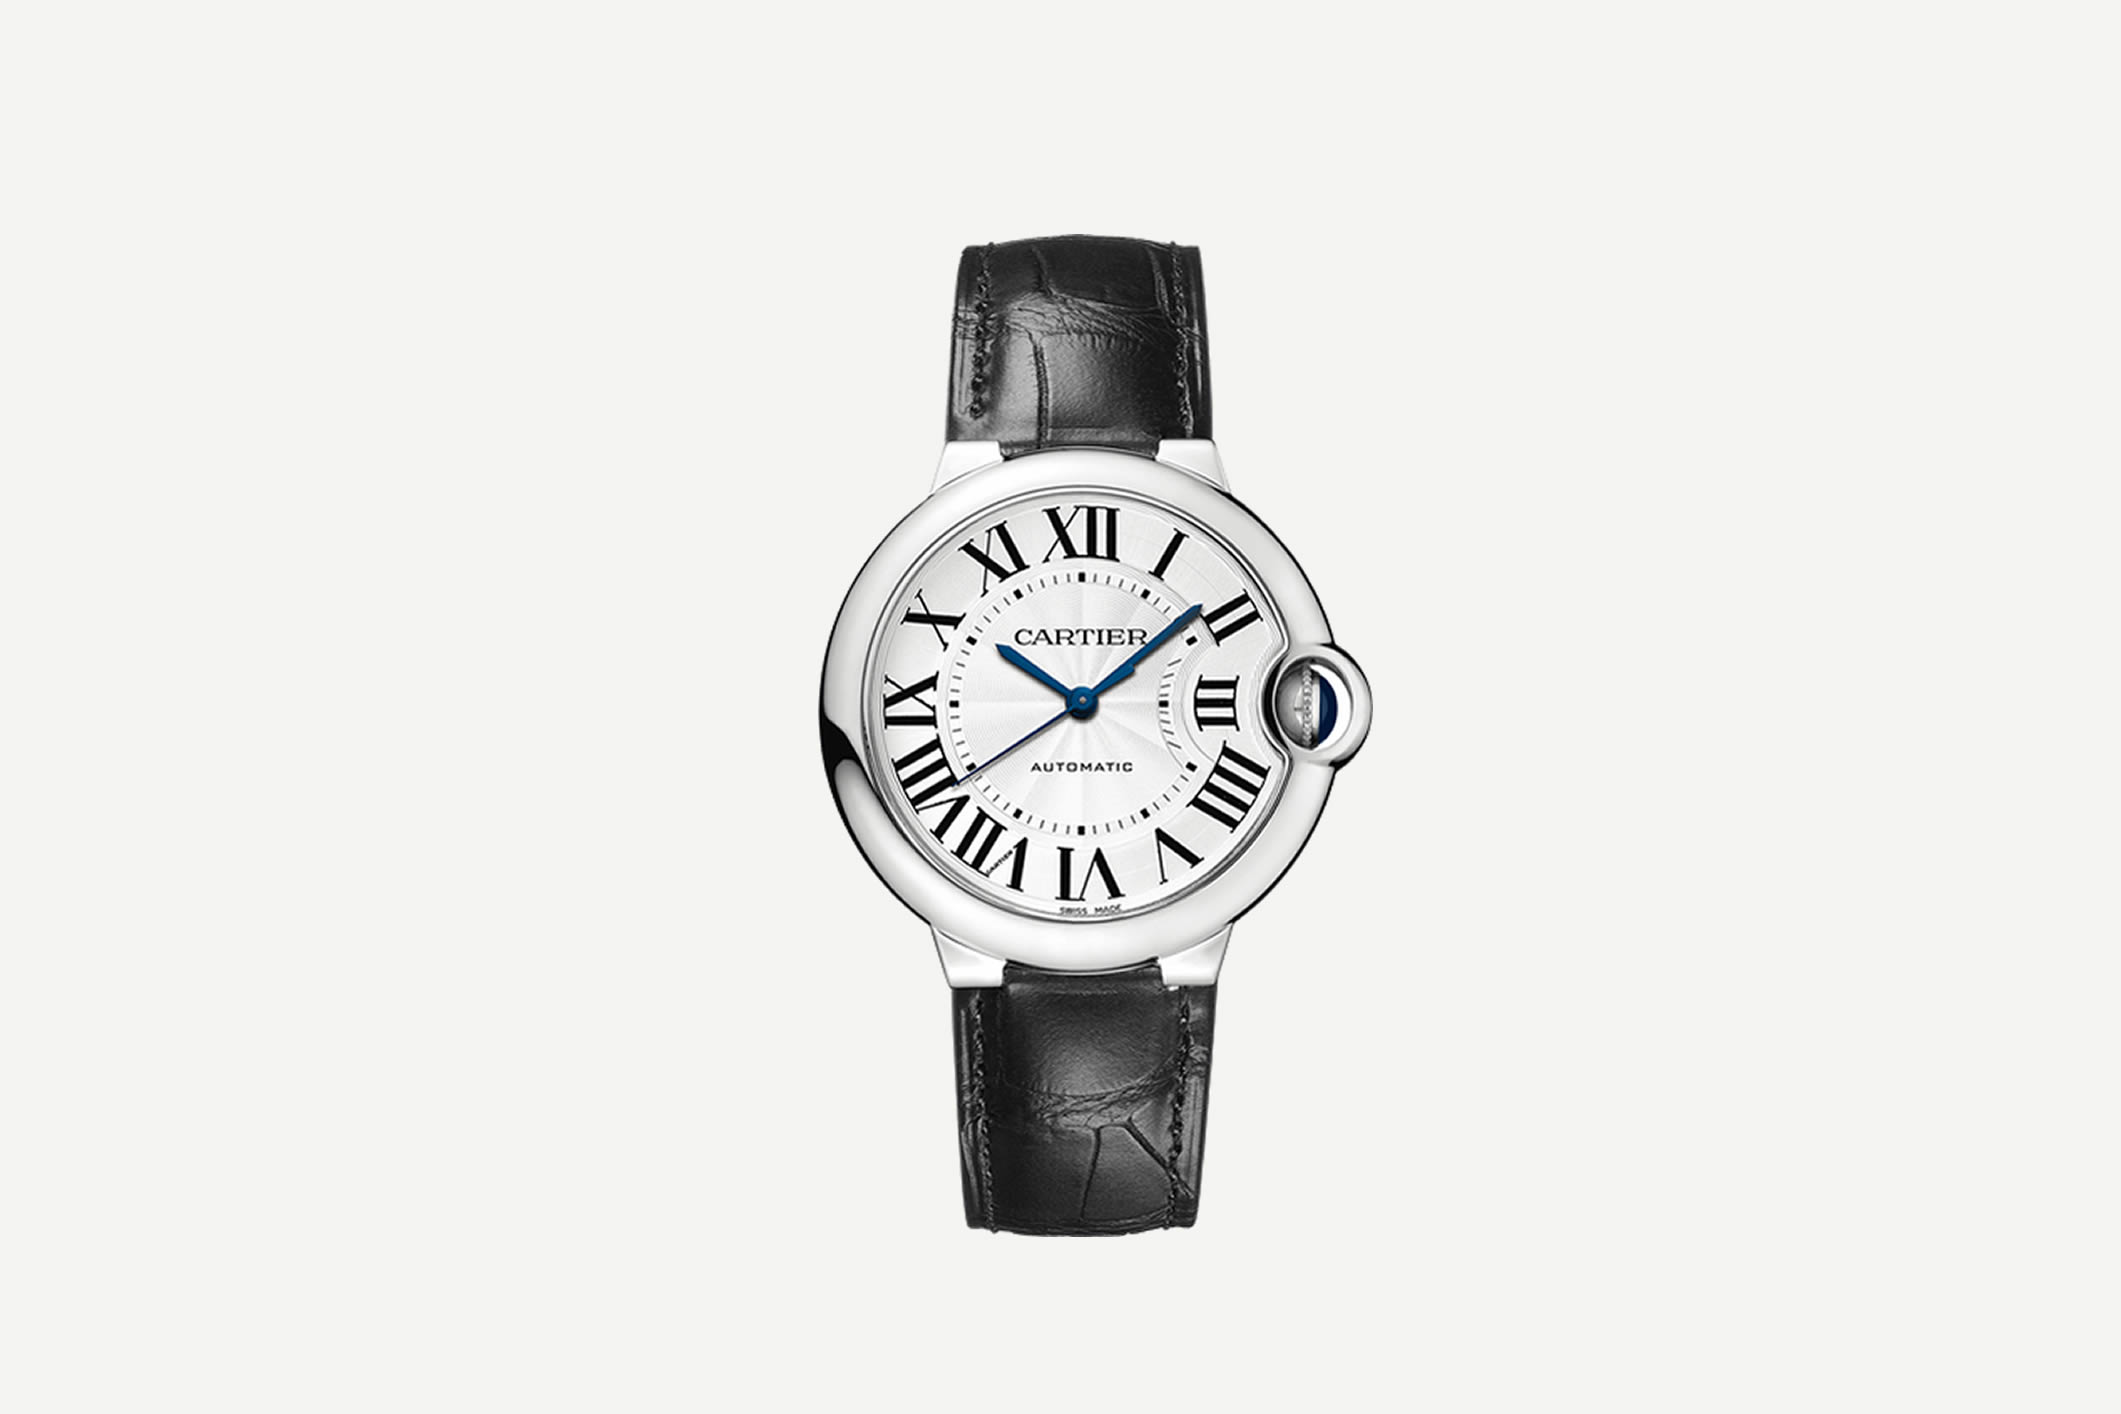 The Ballon Bleu watch with Roman numerals is one of Cartier’s classics